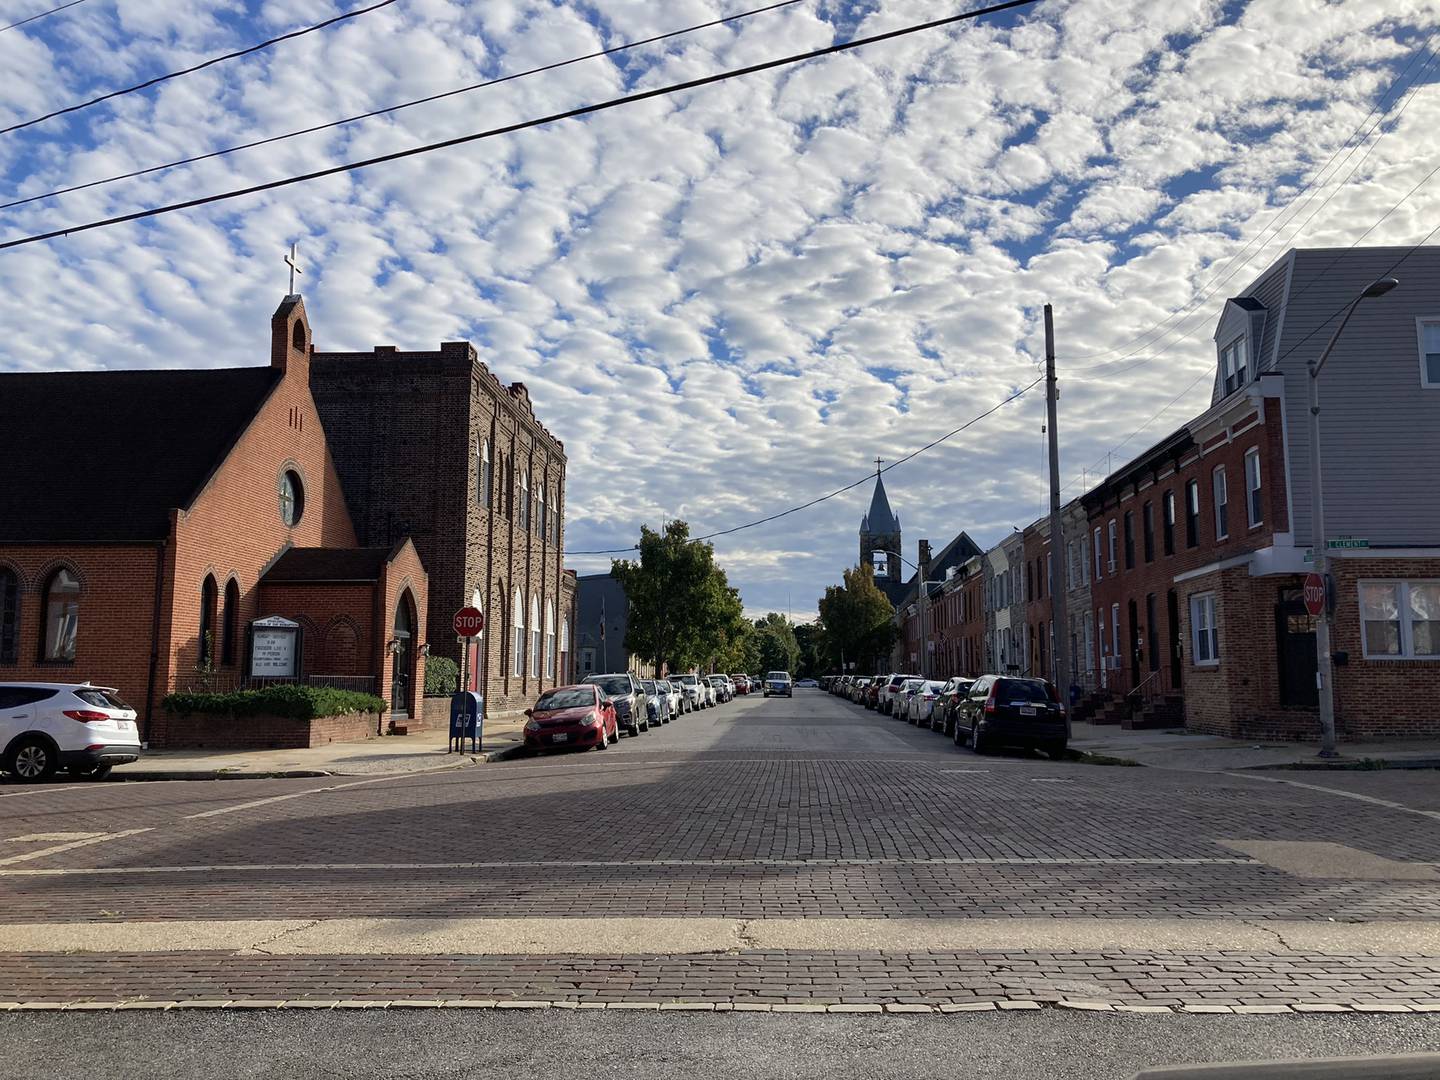 The view looking up Towson Street toward Our Lady of Counsel Catholic Church (right) in Locust Point.